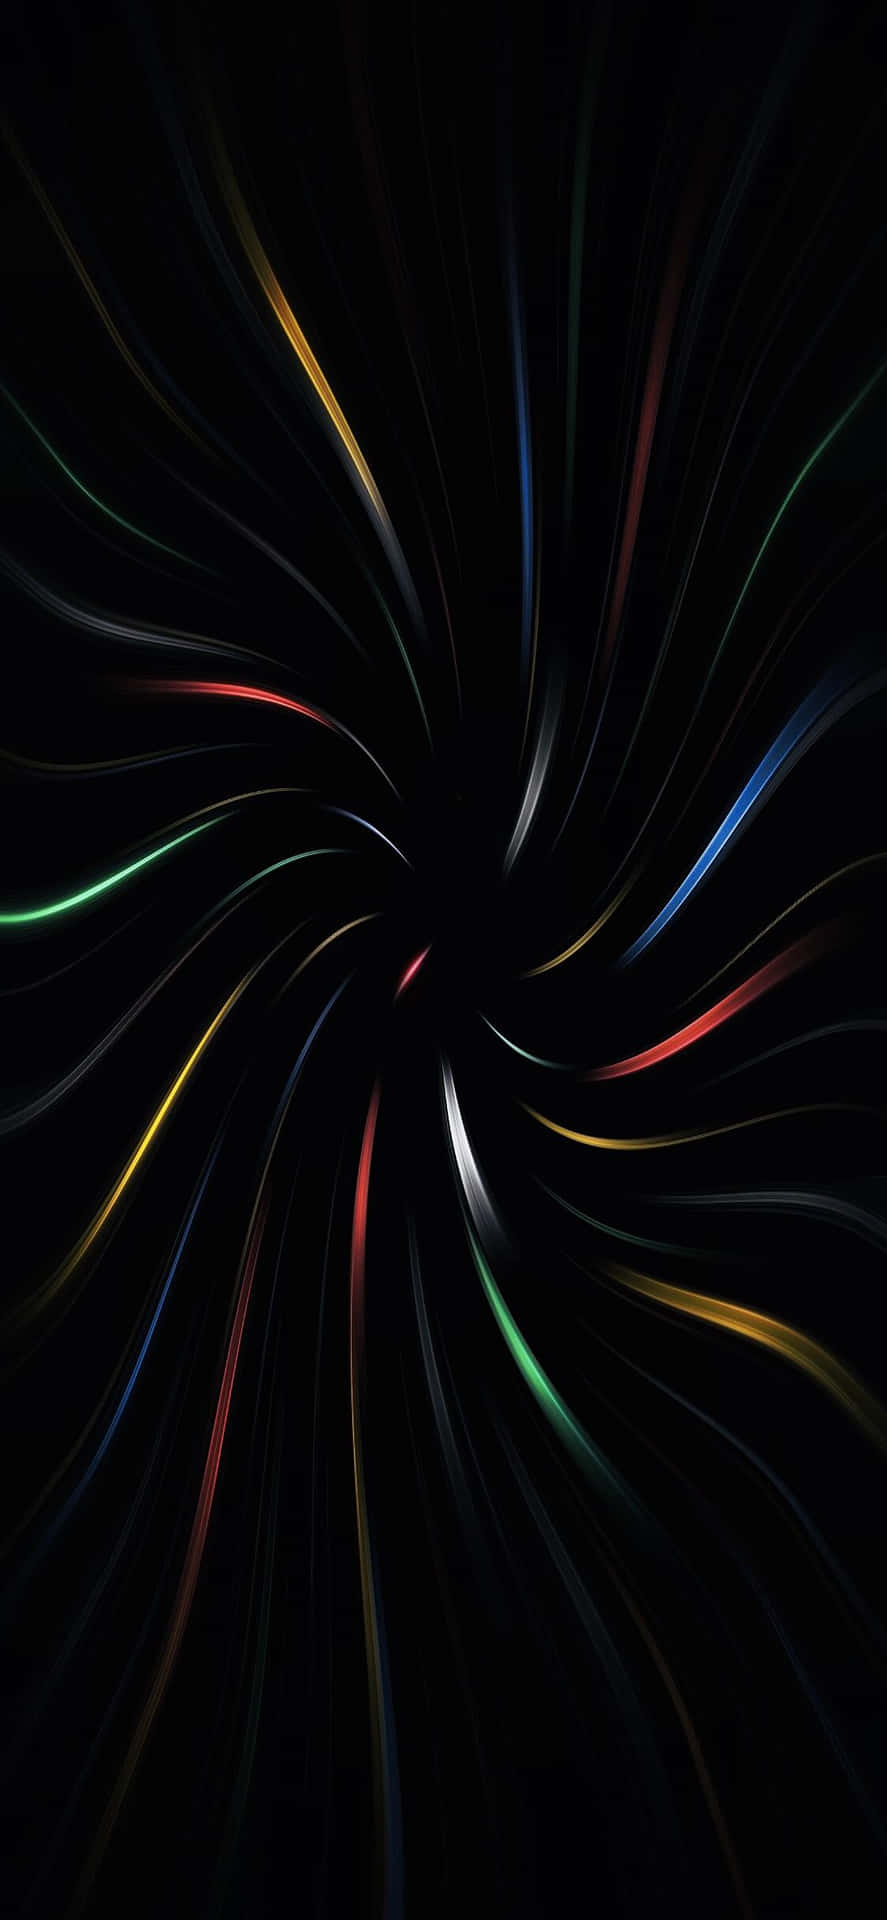 Iphone X Abstract Colorful Light Streaks Wallpaper